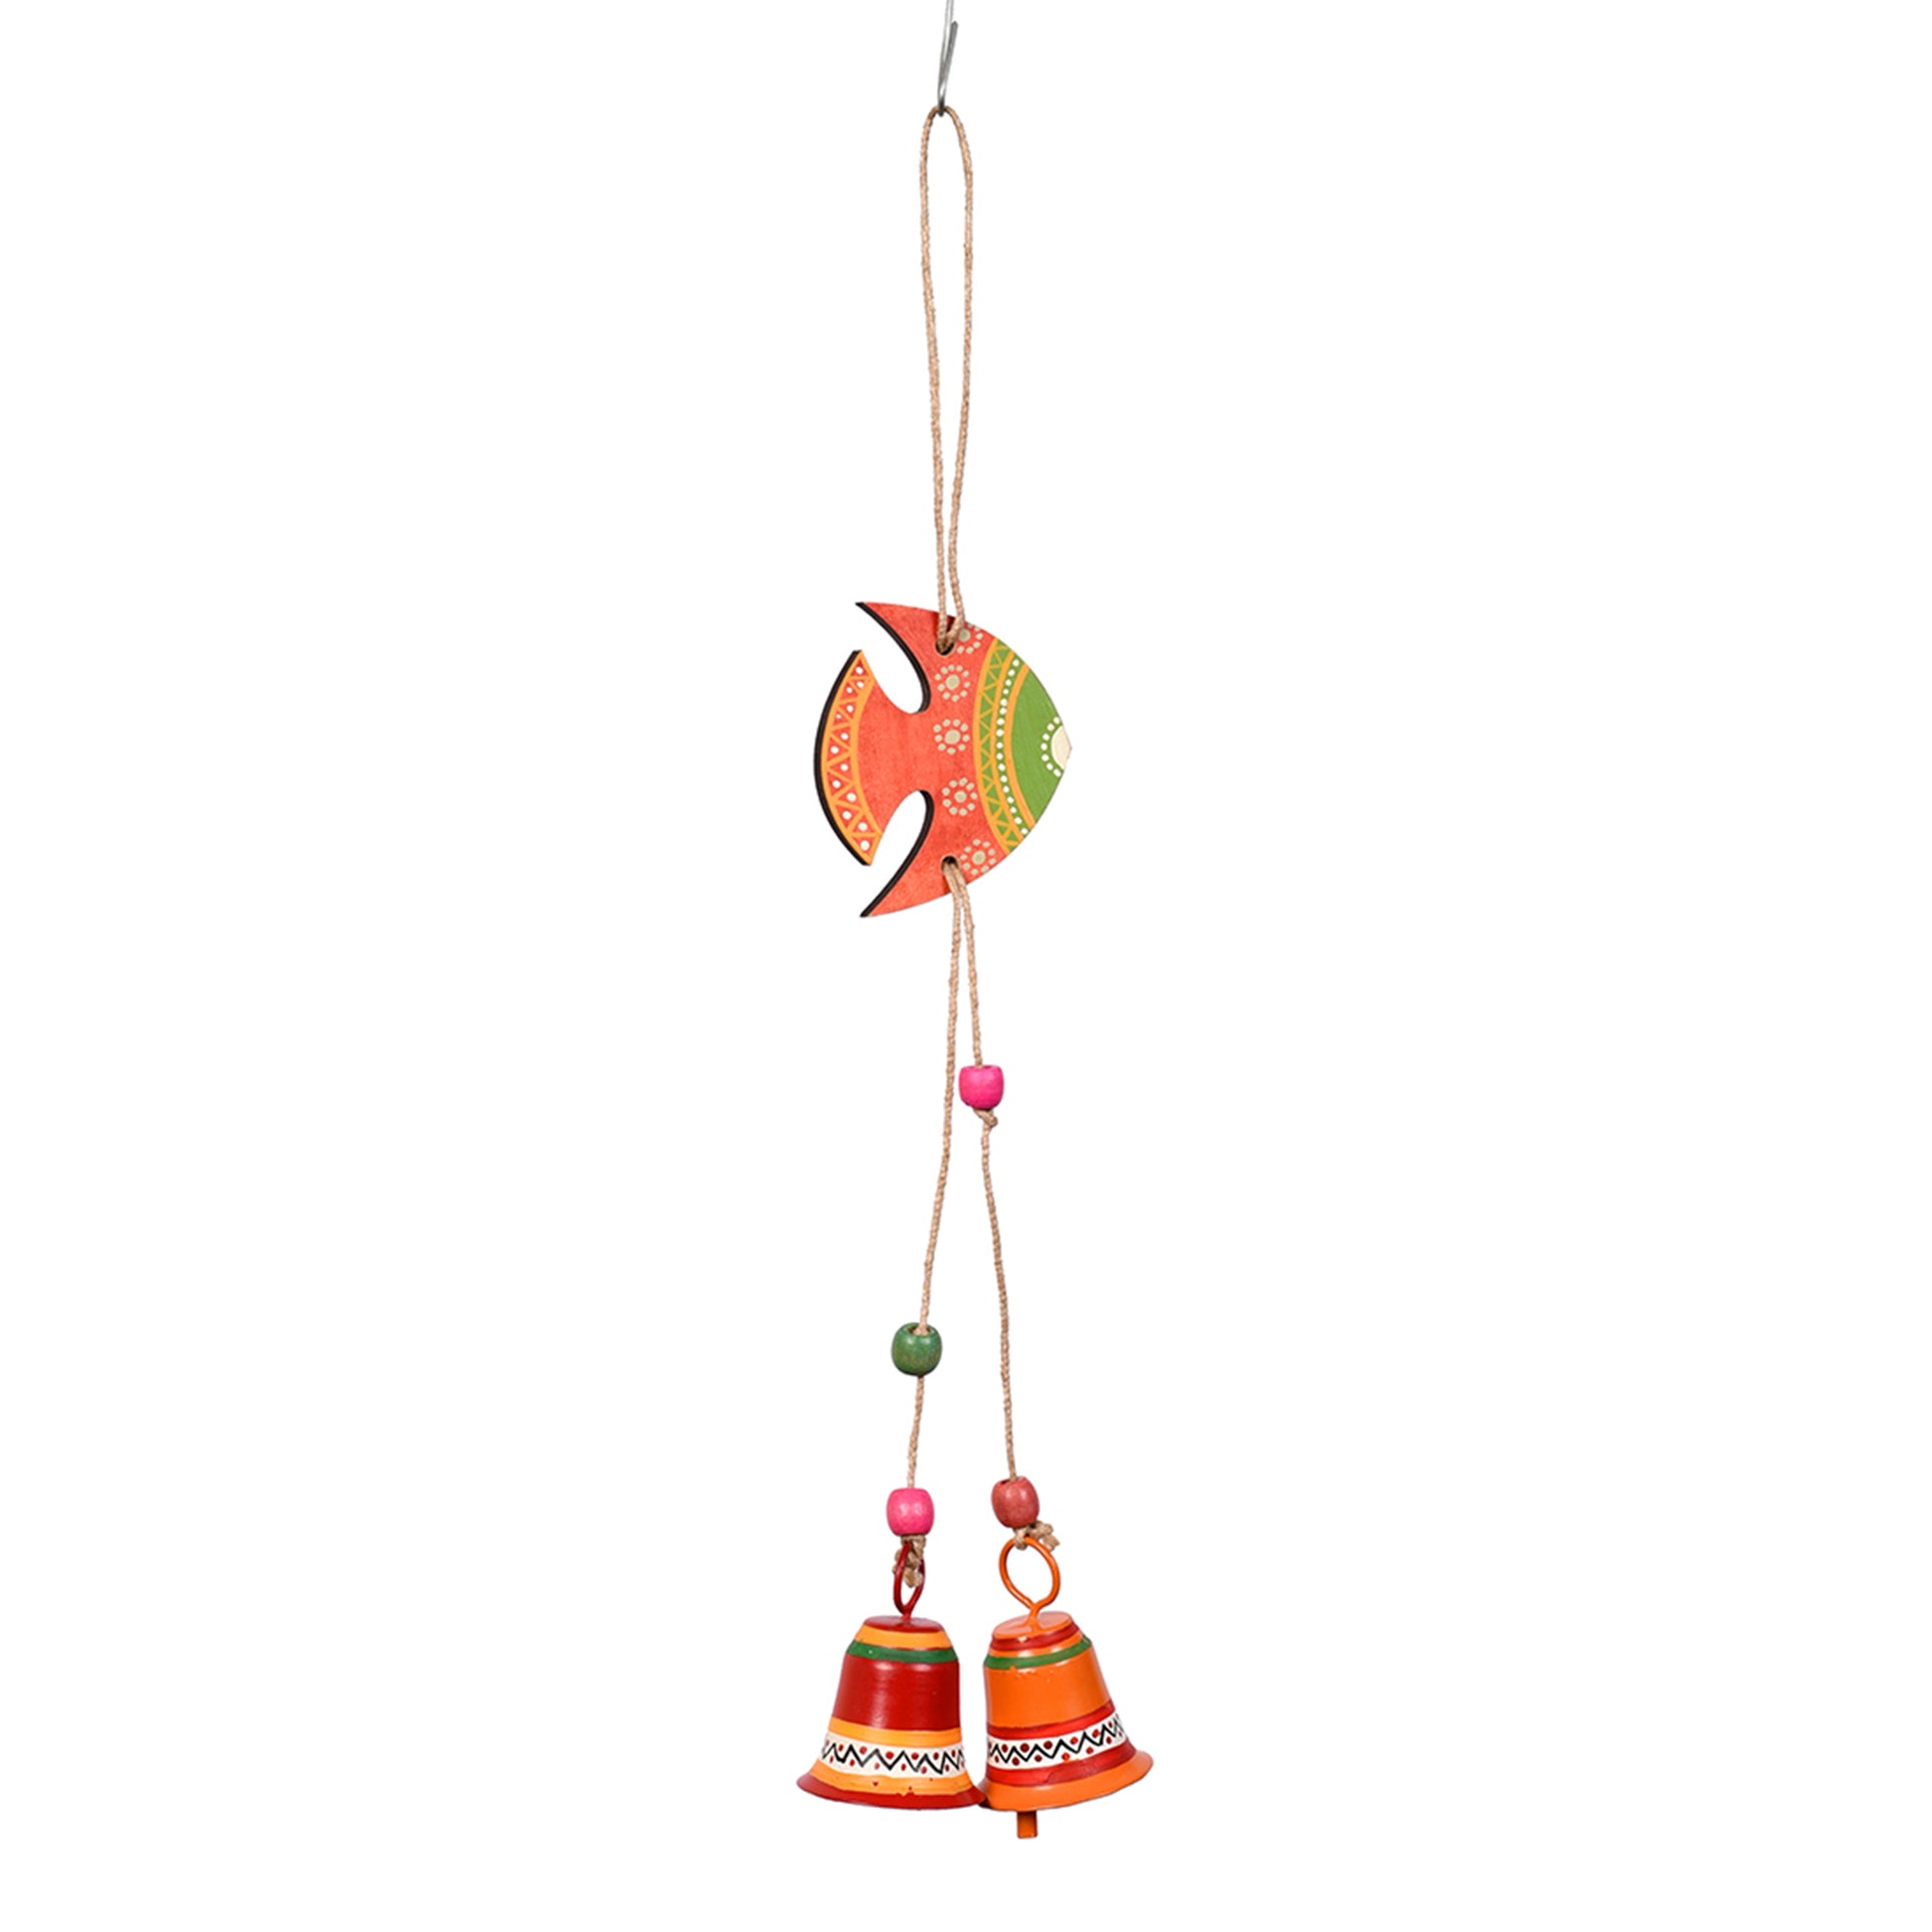 Wind chime bell 